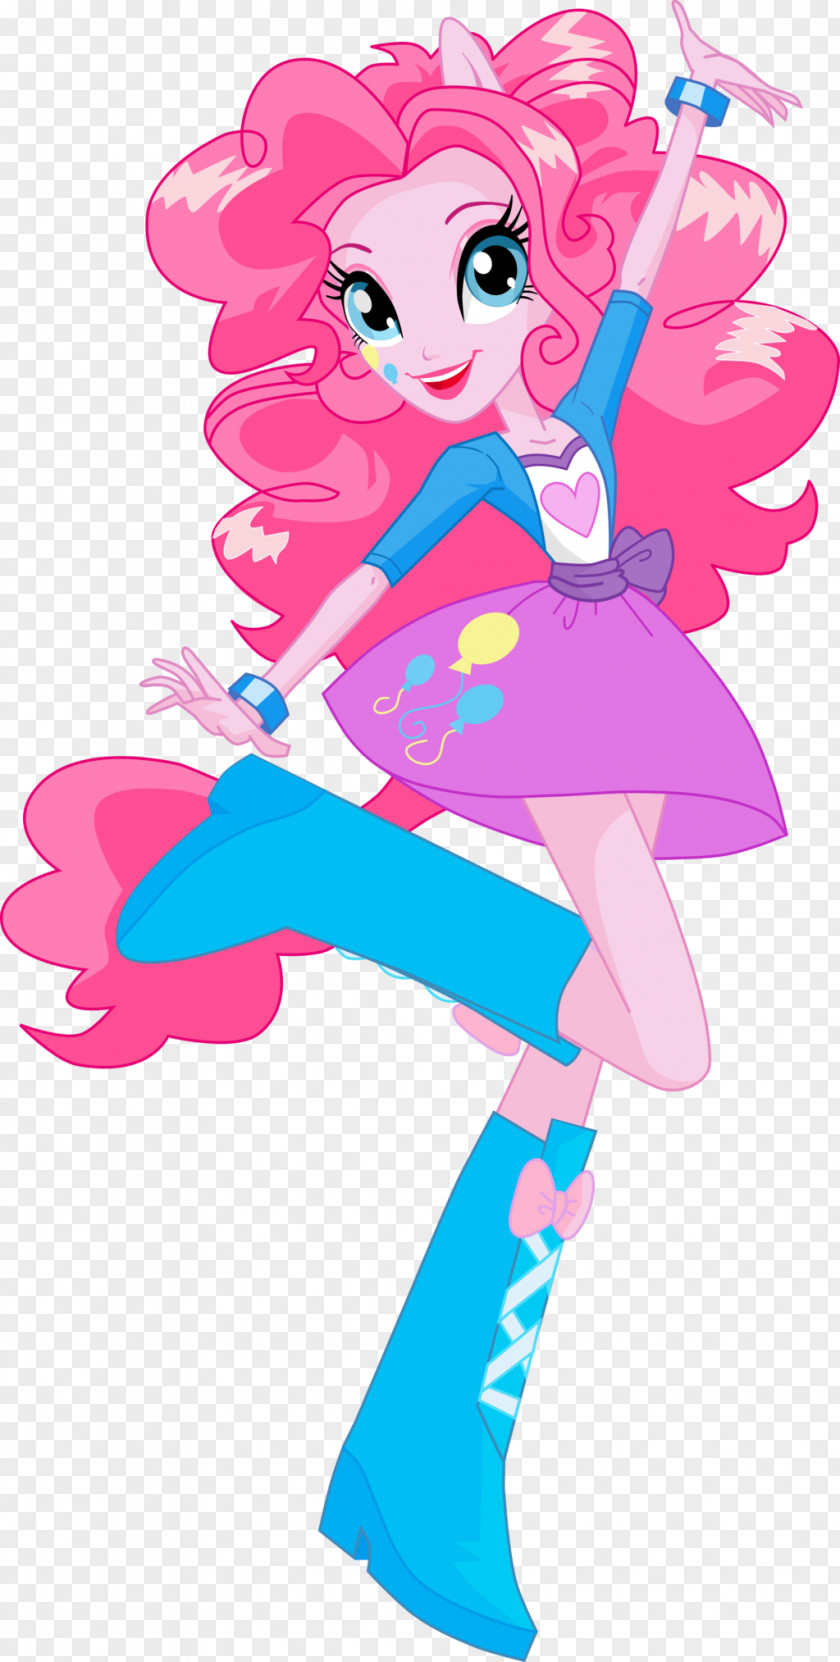 Squeezed Vector Pinkie Pie My Little Pony: Equestria Girls Twilight Sparkle PNG